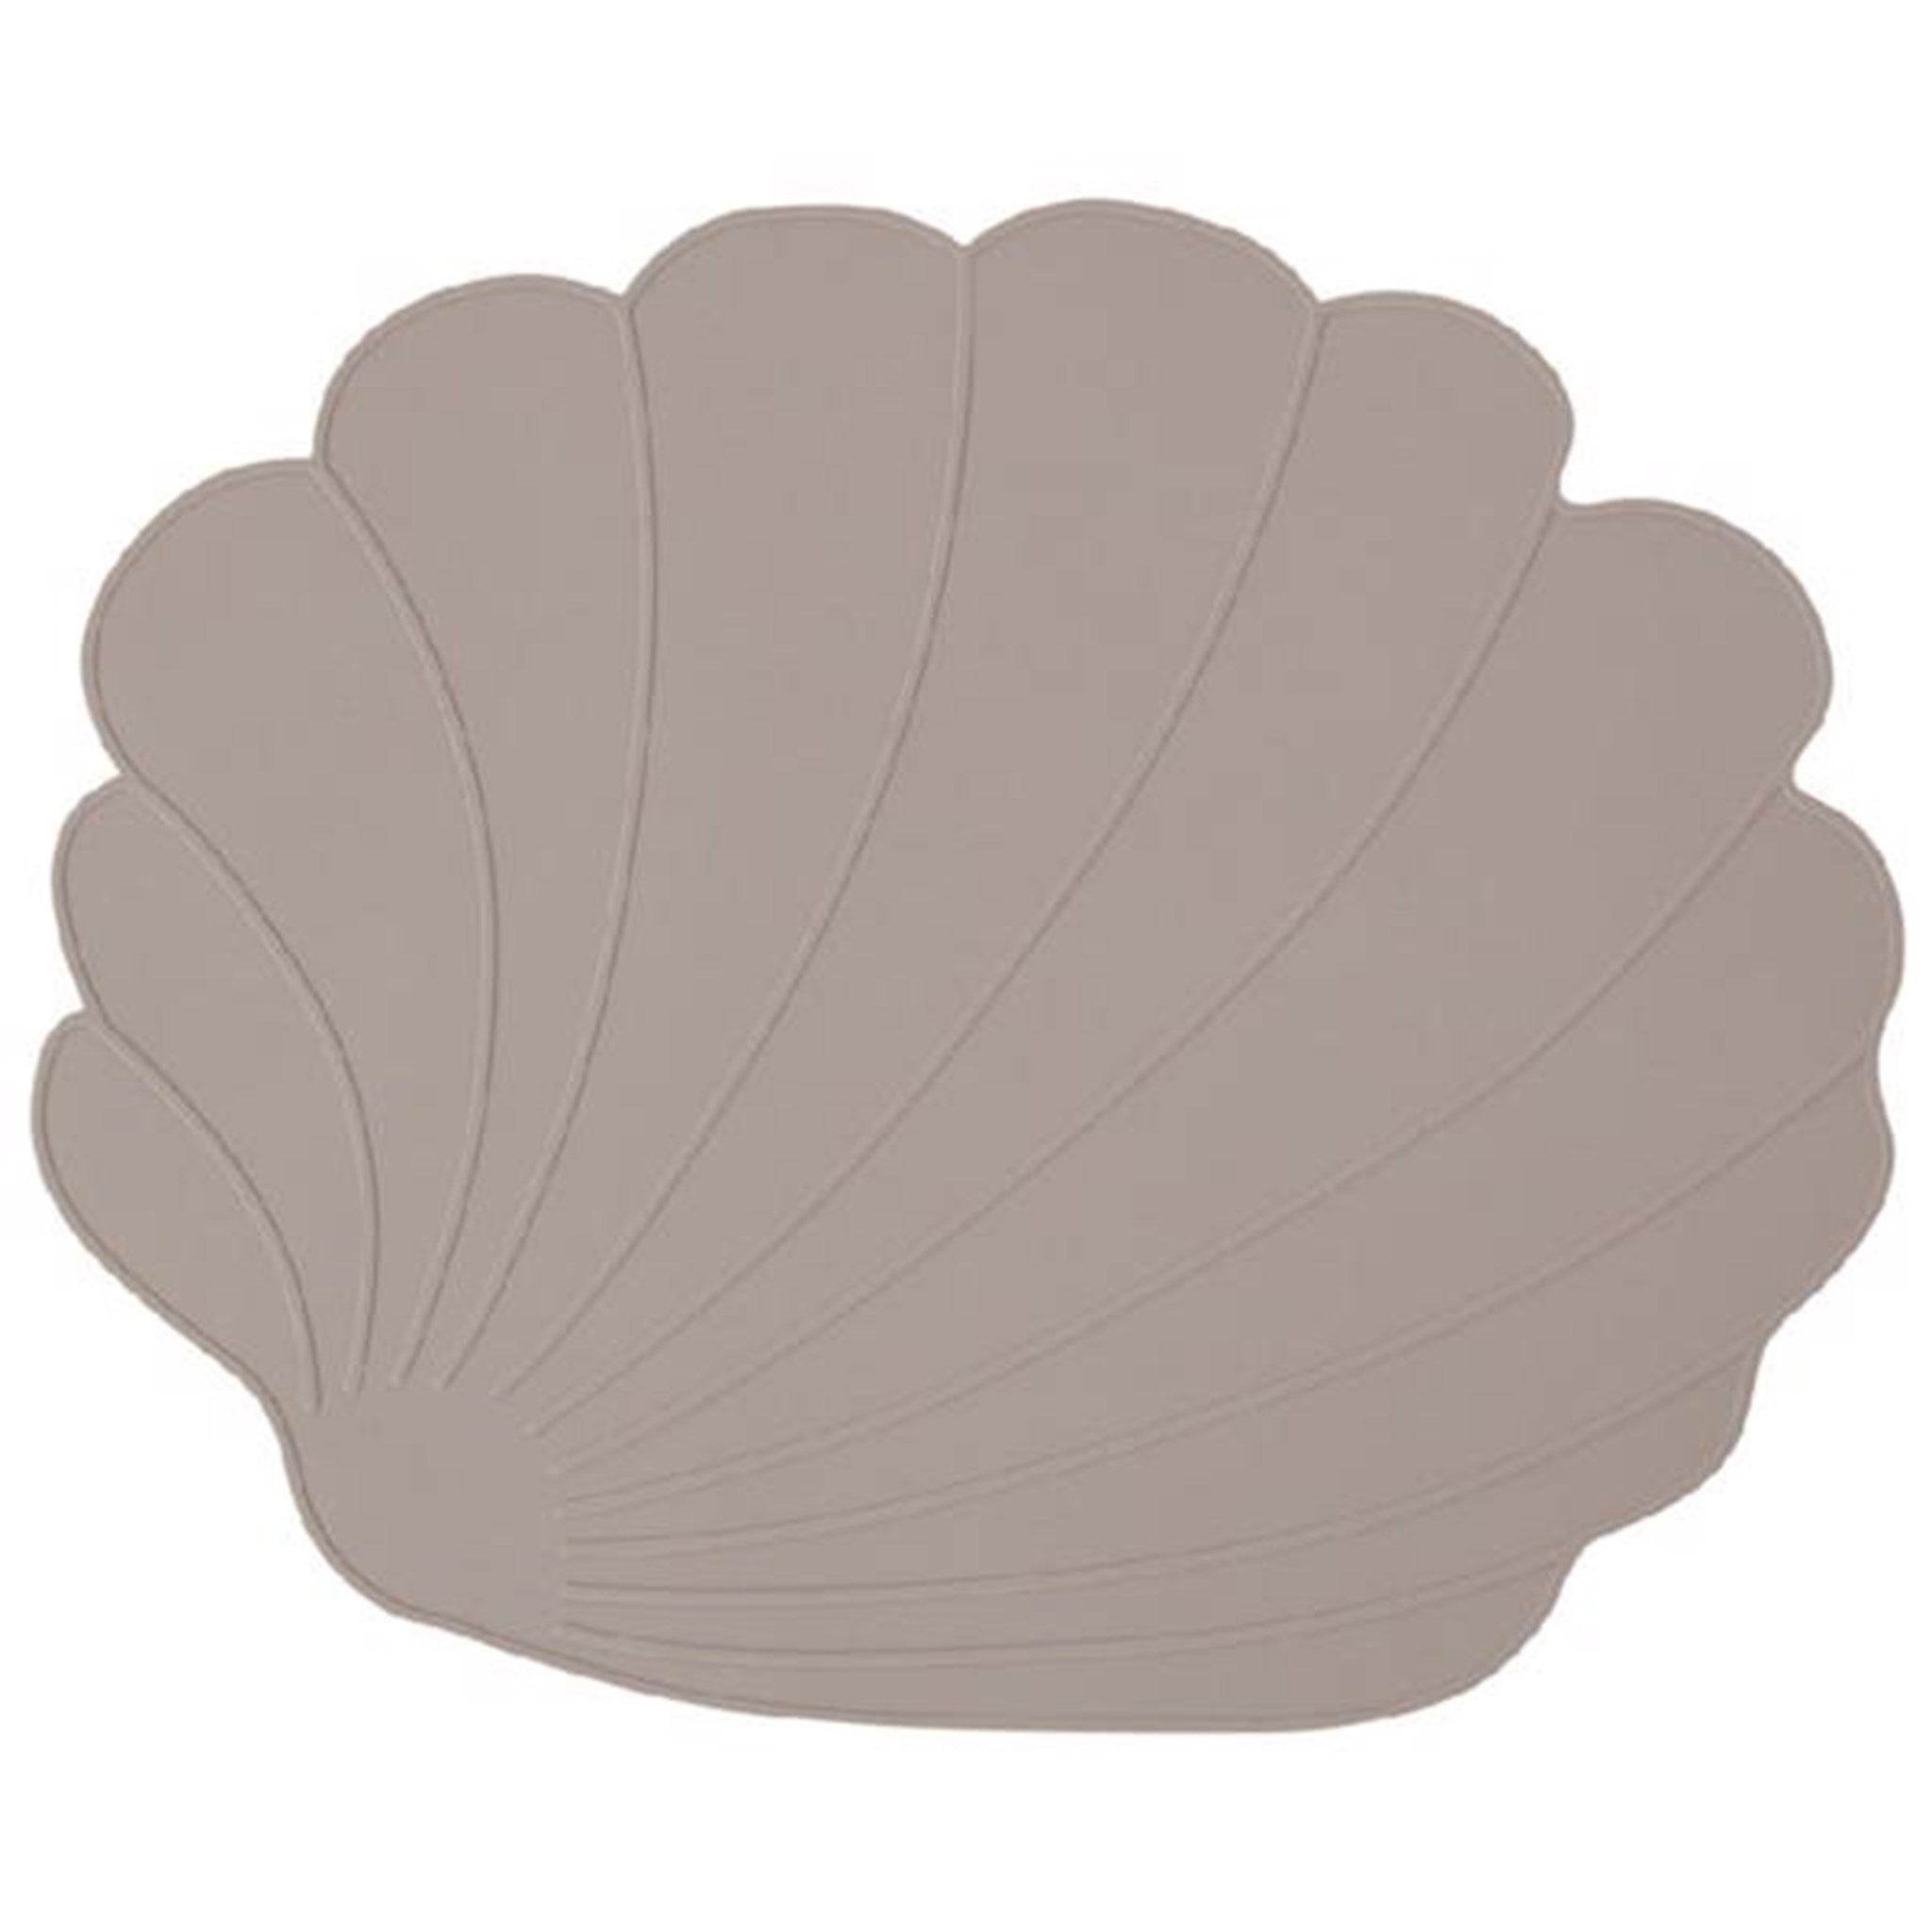 OYOY Seashell Clay Placemat